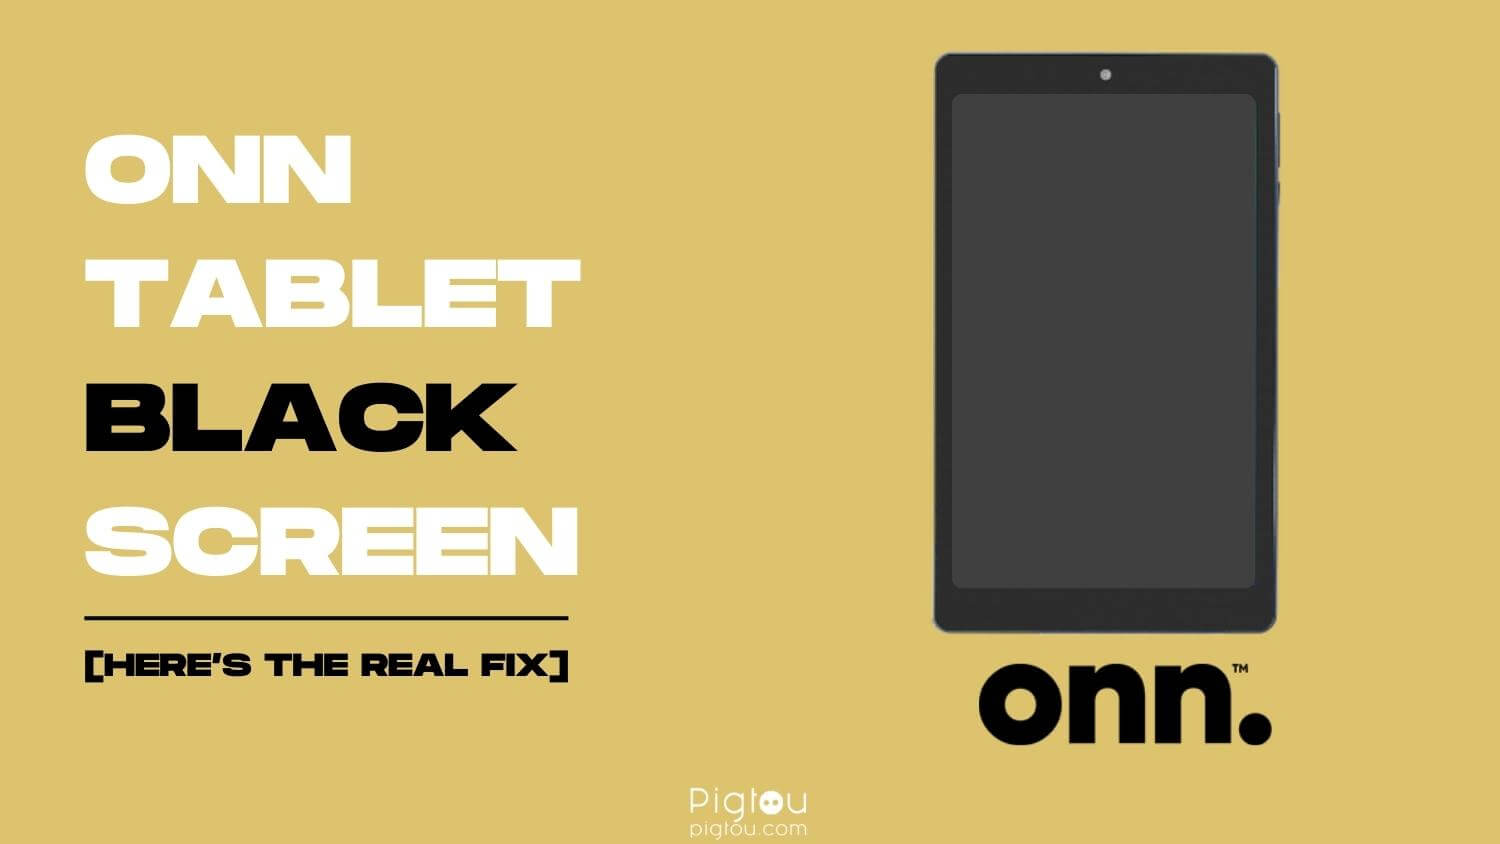 Onn Tablet Black Screen [HERE'S REAL FIX!]